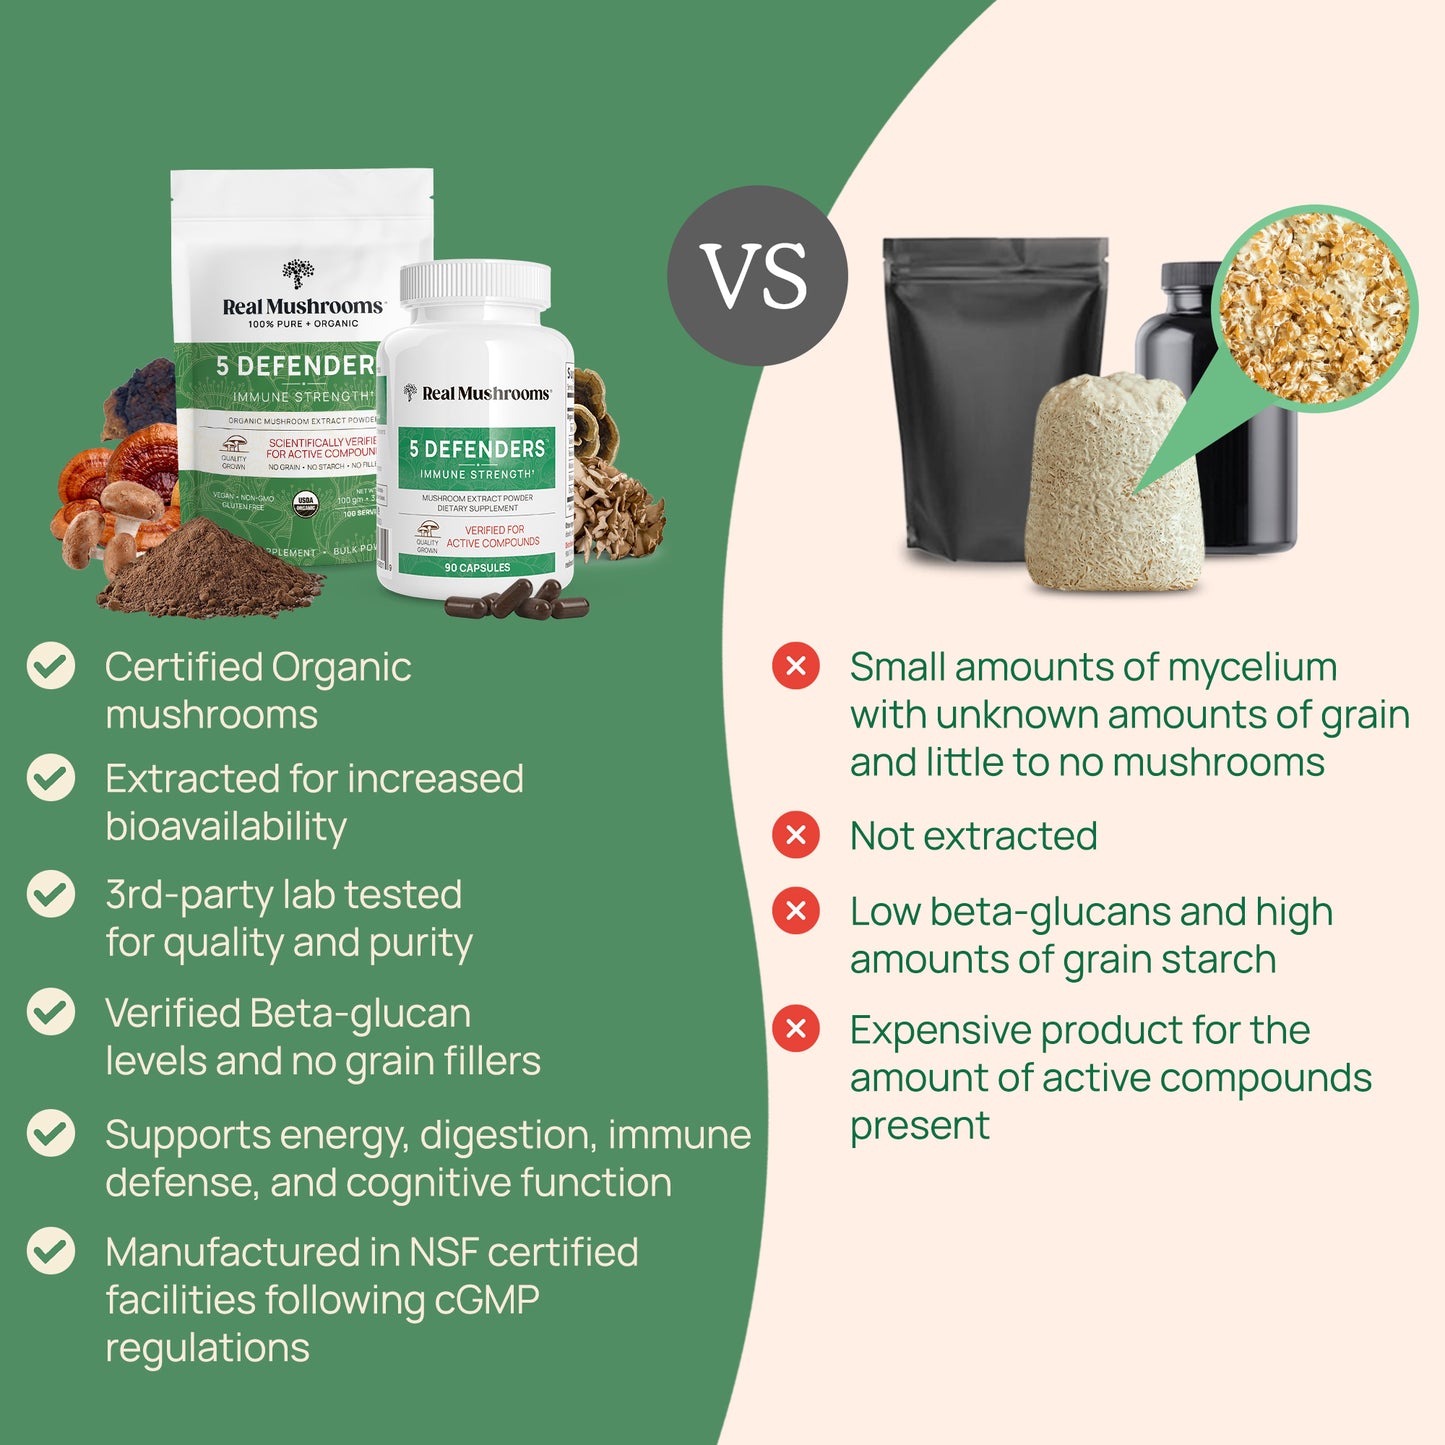 Comparison of two different mushroom supplement products highlighting the advantages of the "5 Defenders Organic Mushroom Complex – Bulk Powder" supplement by Real Mushrooms over an unspecified alternative, with a focus on the "5 Defenders" being certified organic, tested for purity, and highly effective.